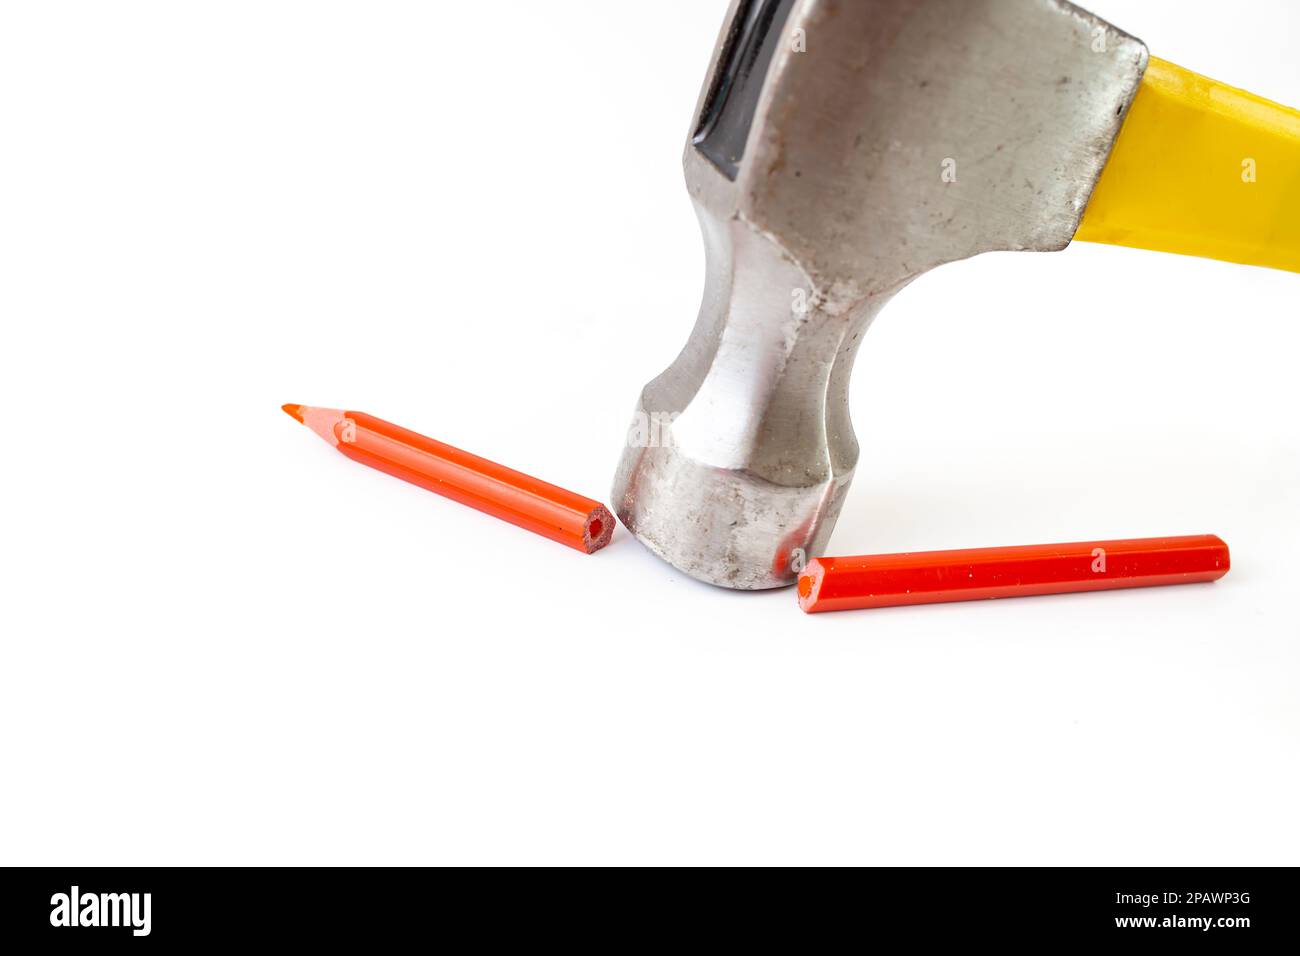 Hammer breaking a red crayon in two pieces, isolated on white background, soft focus close up. Stock Photo